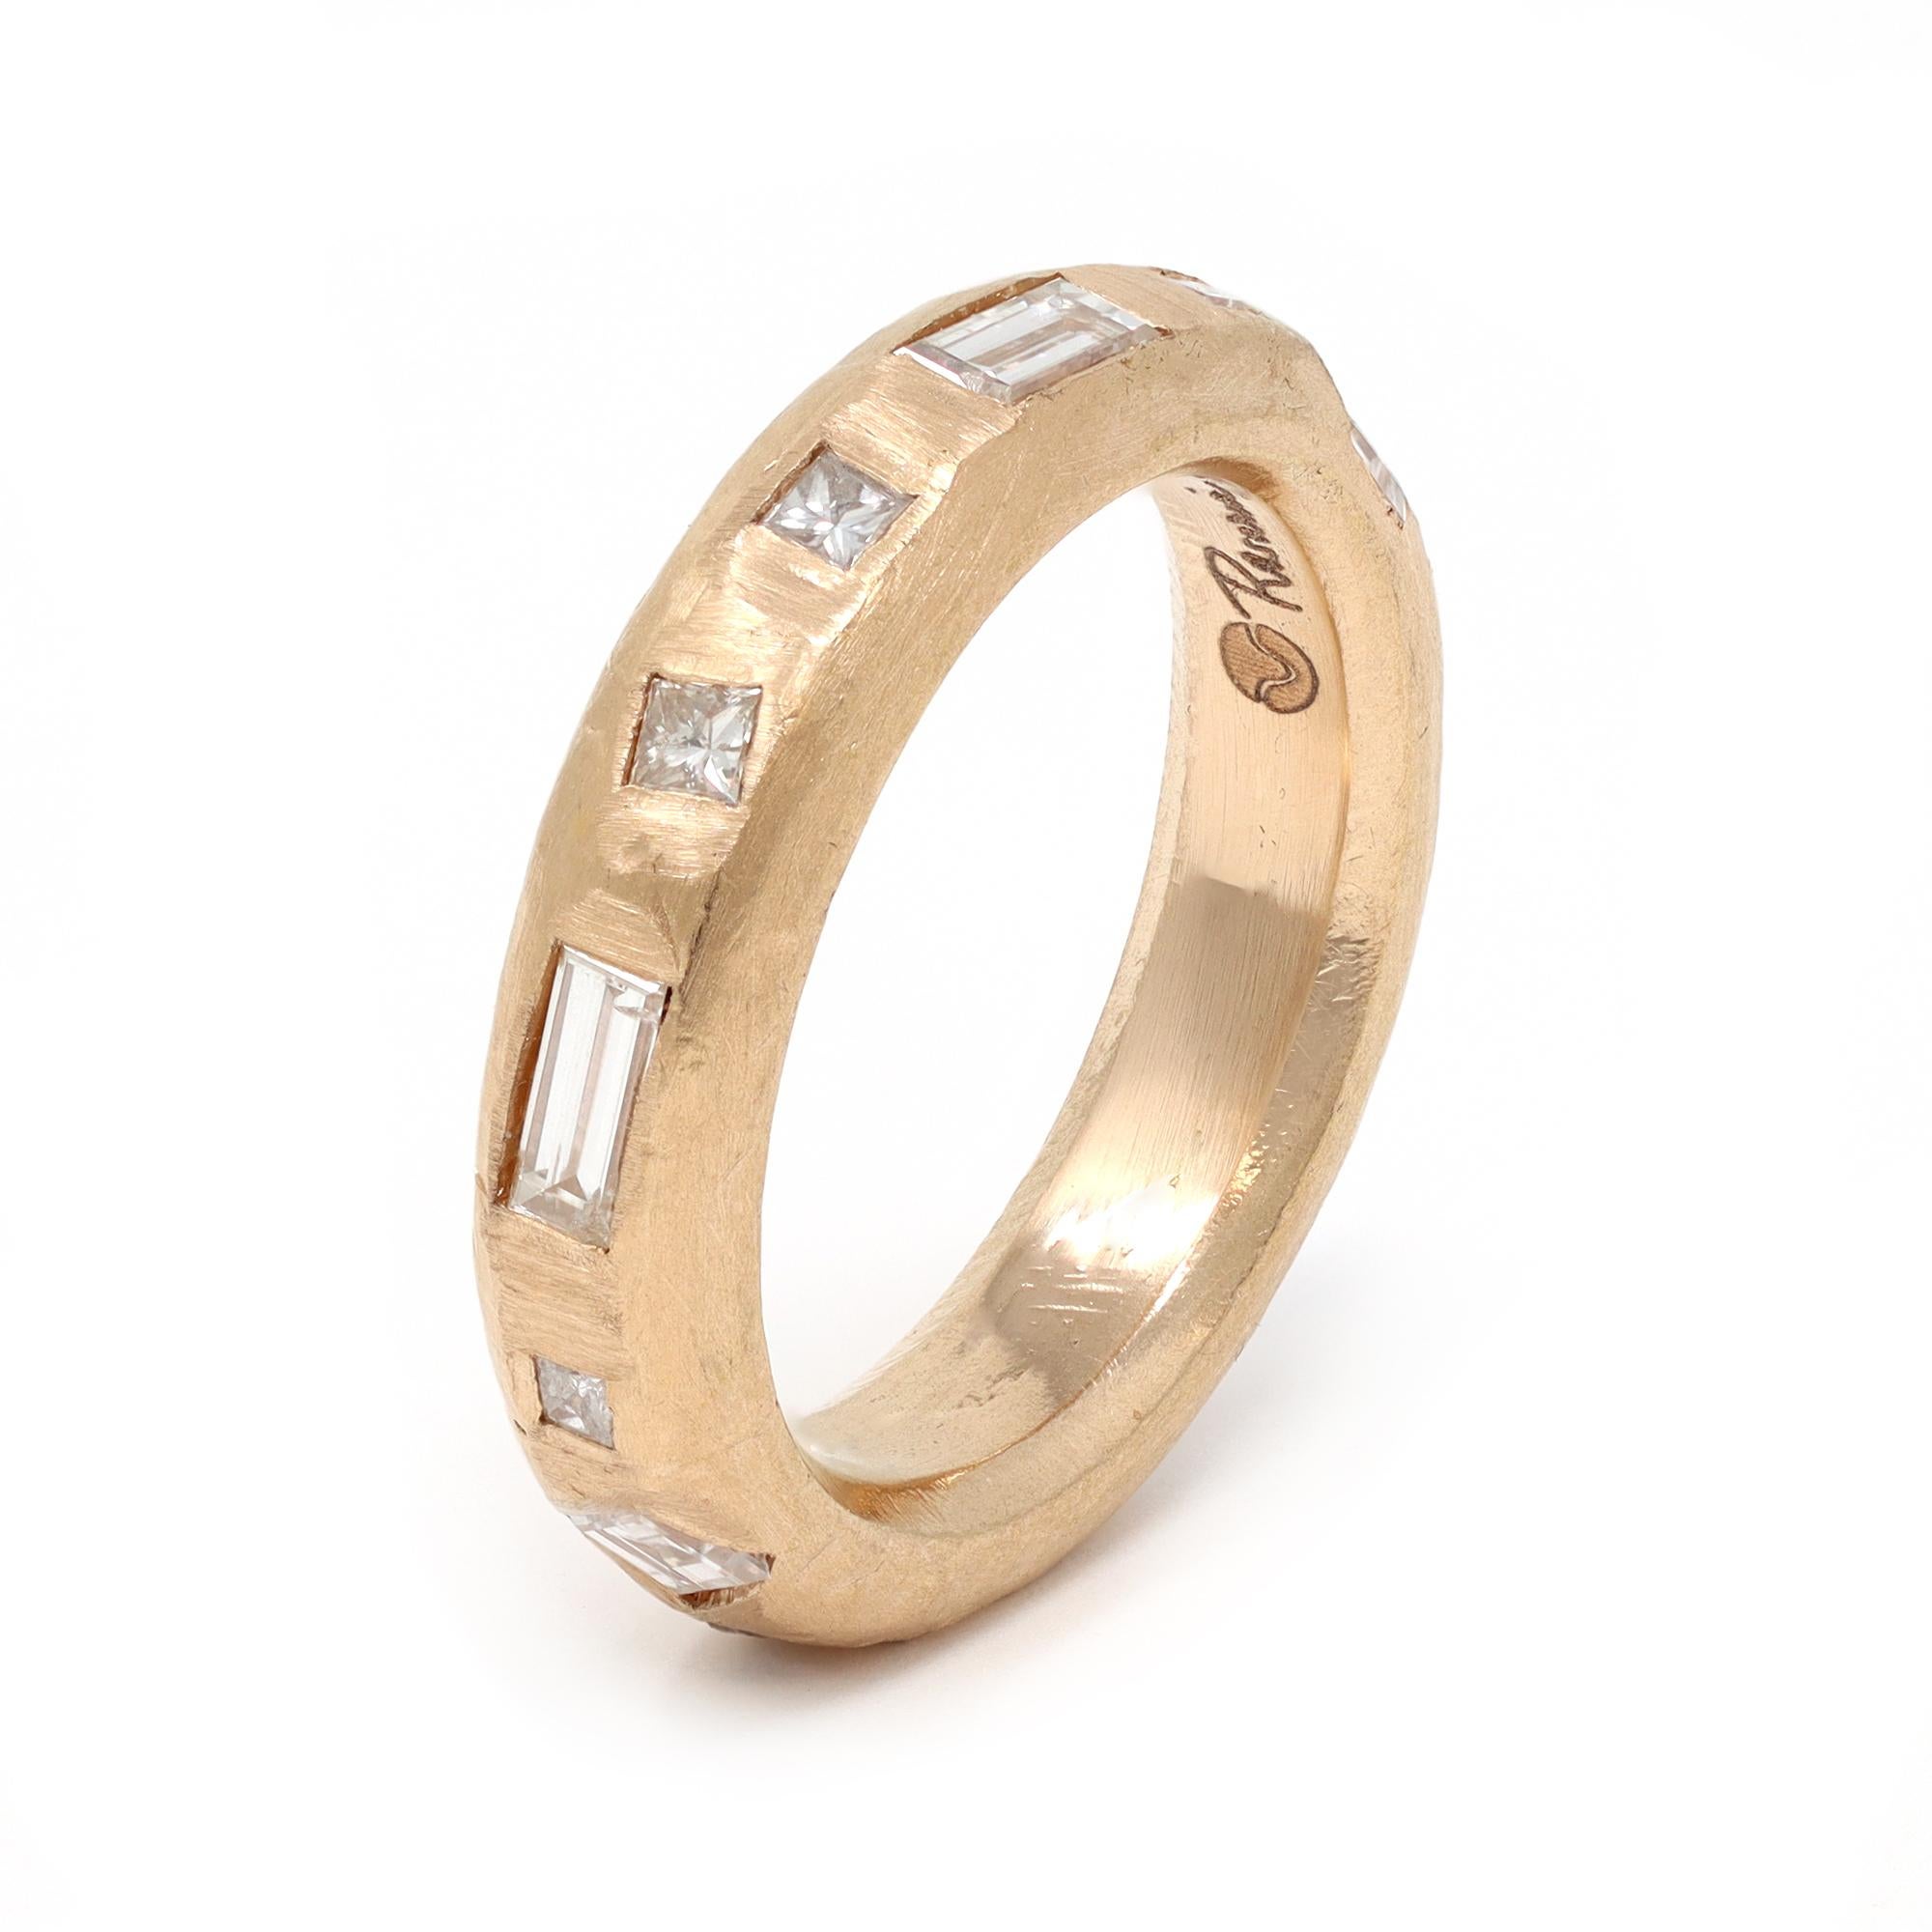 A 18 karat solid rose gold band ring created by Rosaria Varra. The band is studded with a mix of step cut diamonds. The weight of the diamonds is 1.36 carats, GH color and VS clarity. The gross weight is 9.6 grams and fits a size 6 ½.
 This band